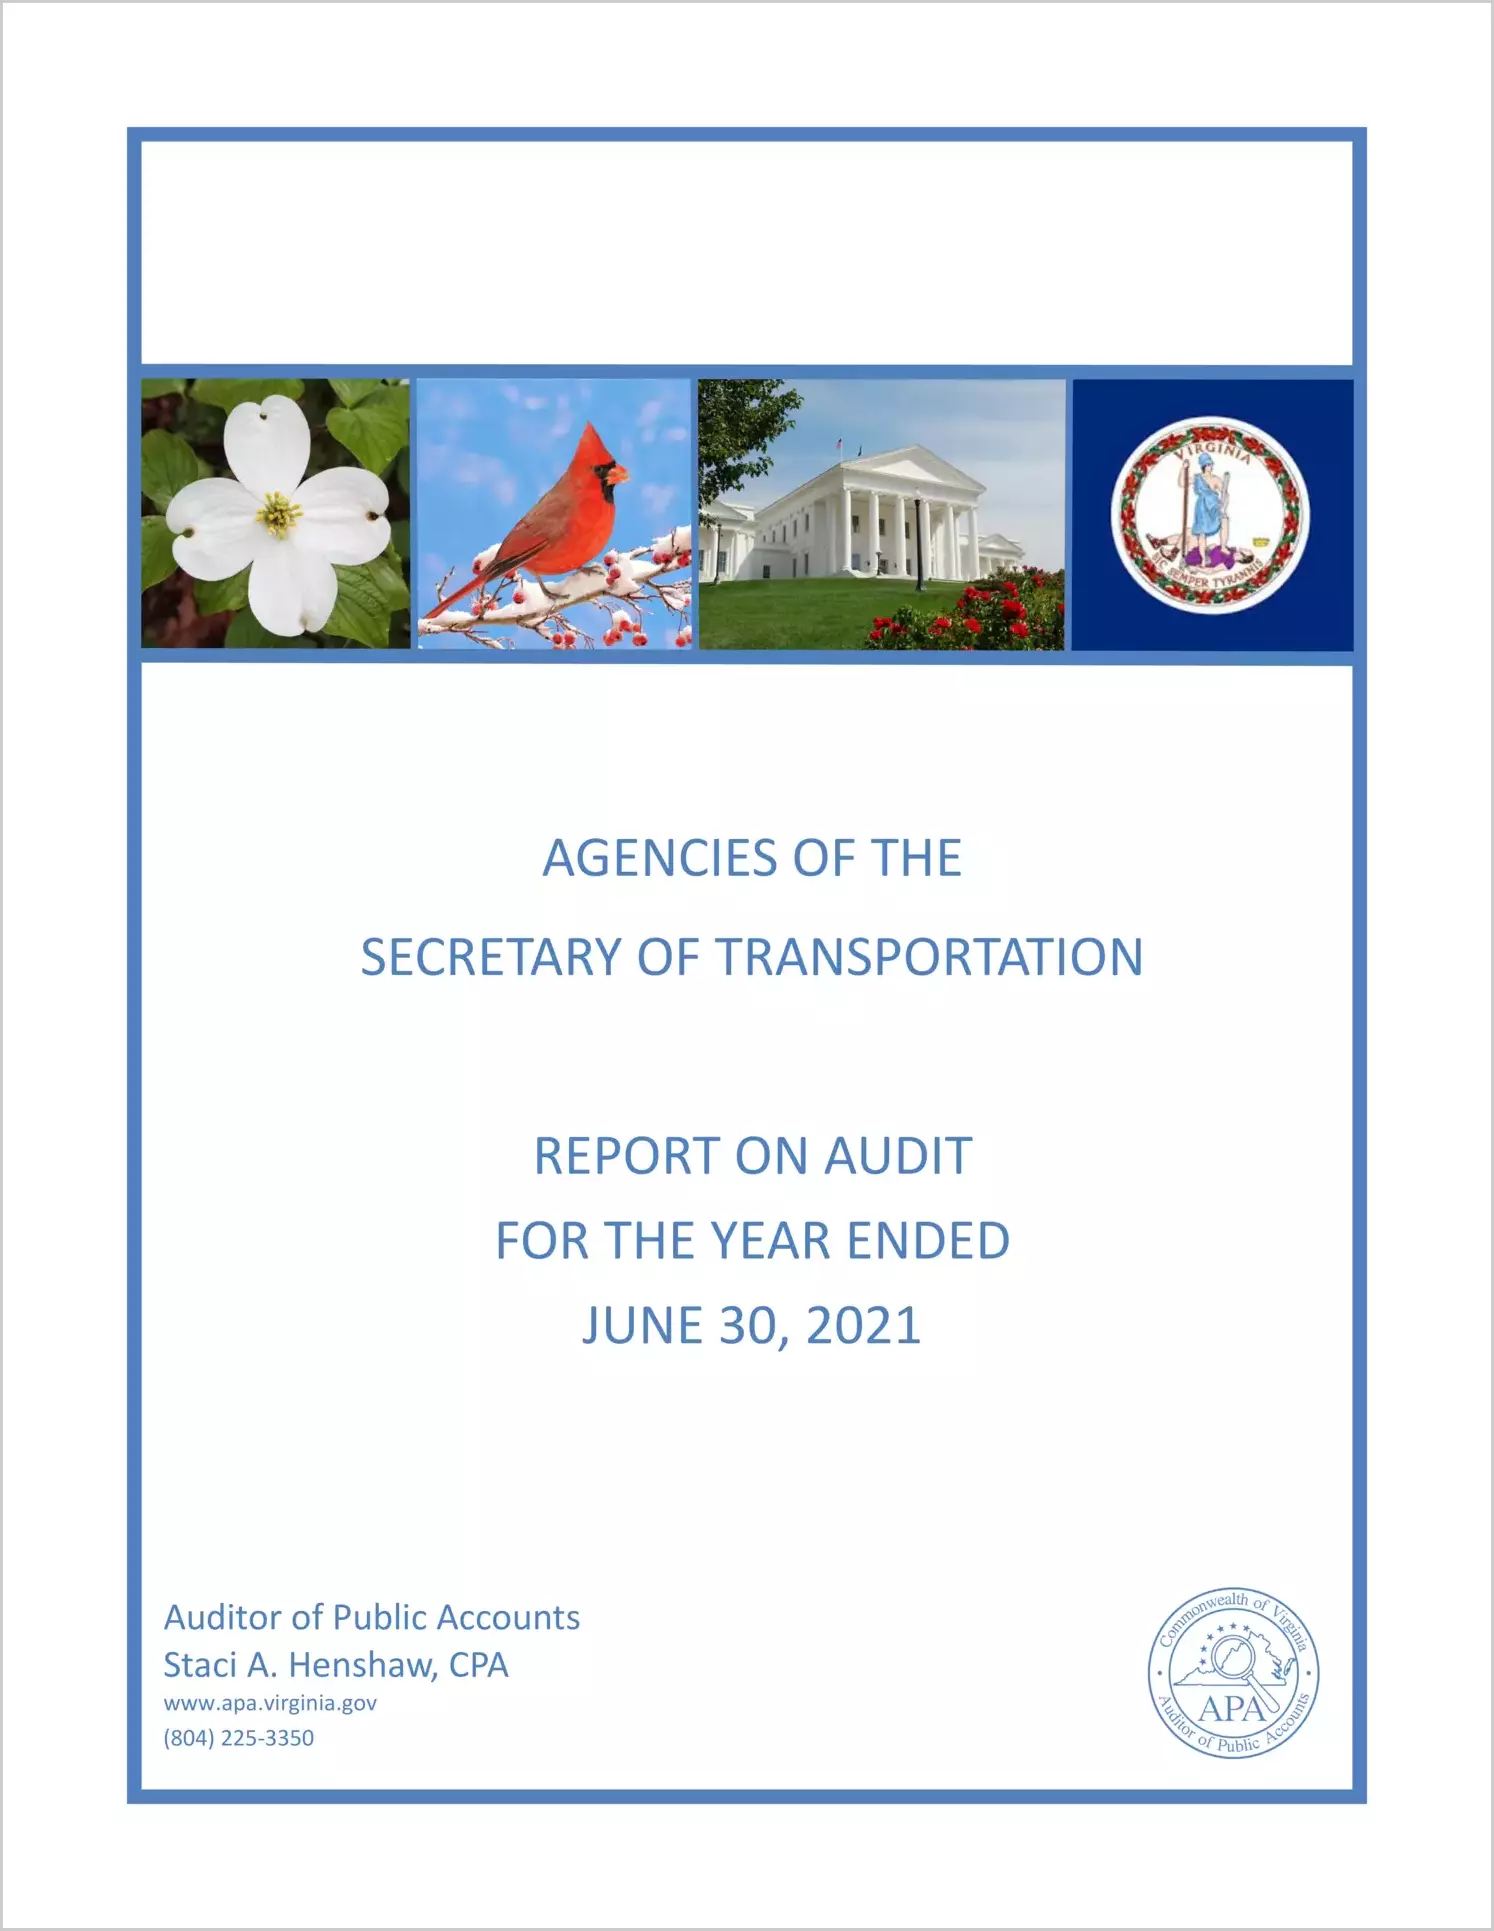 Agencies of the Secretary of Transportation for the year ended June 30, 2021